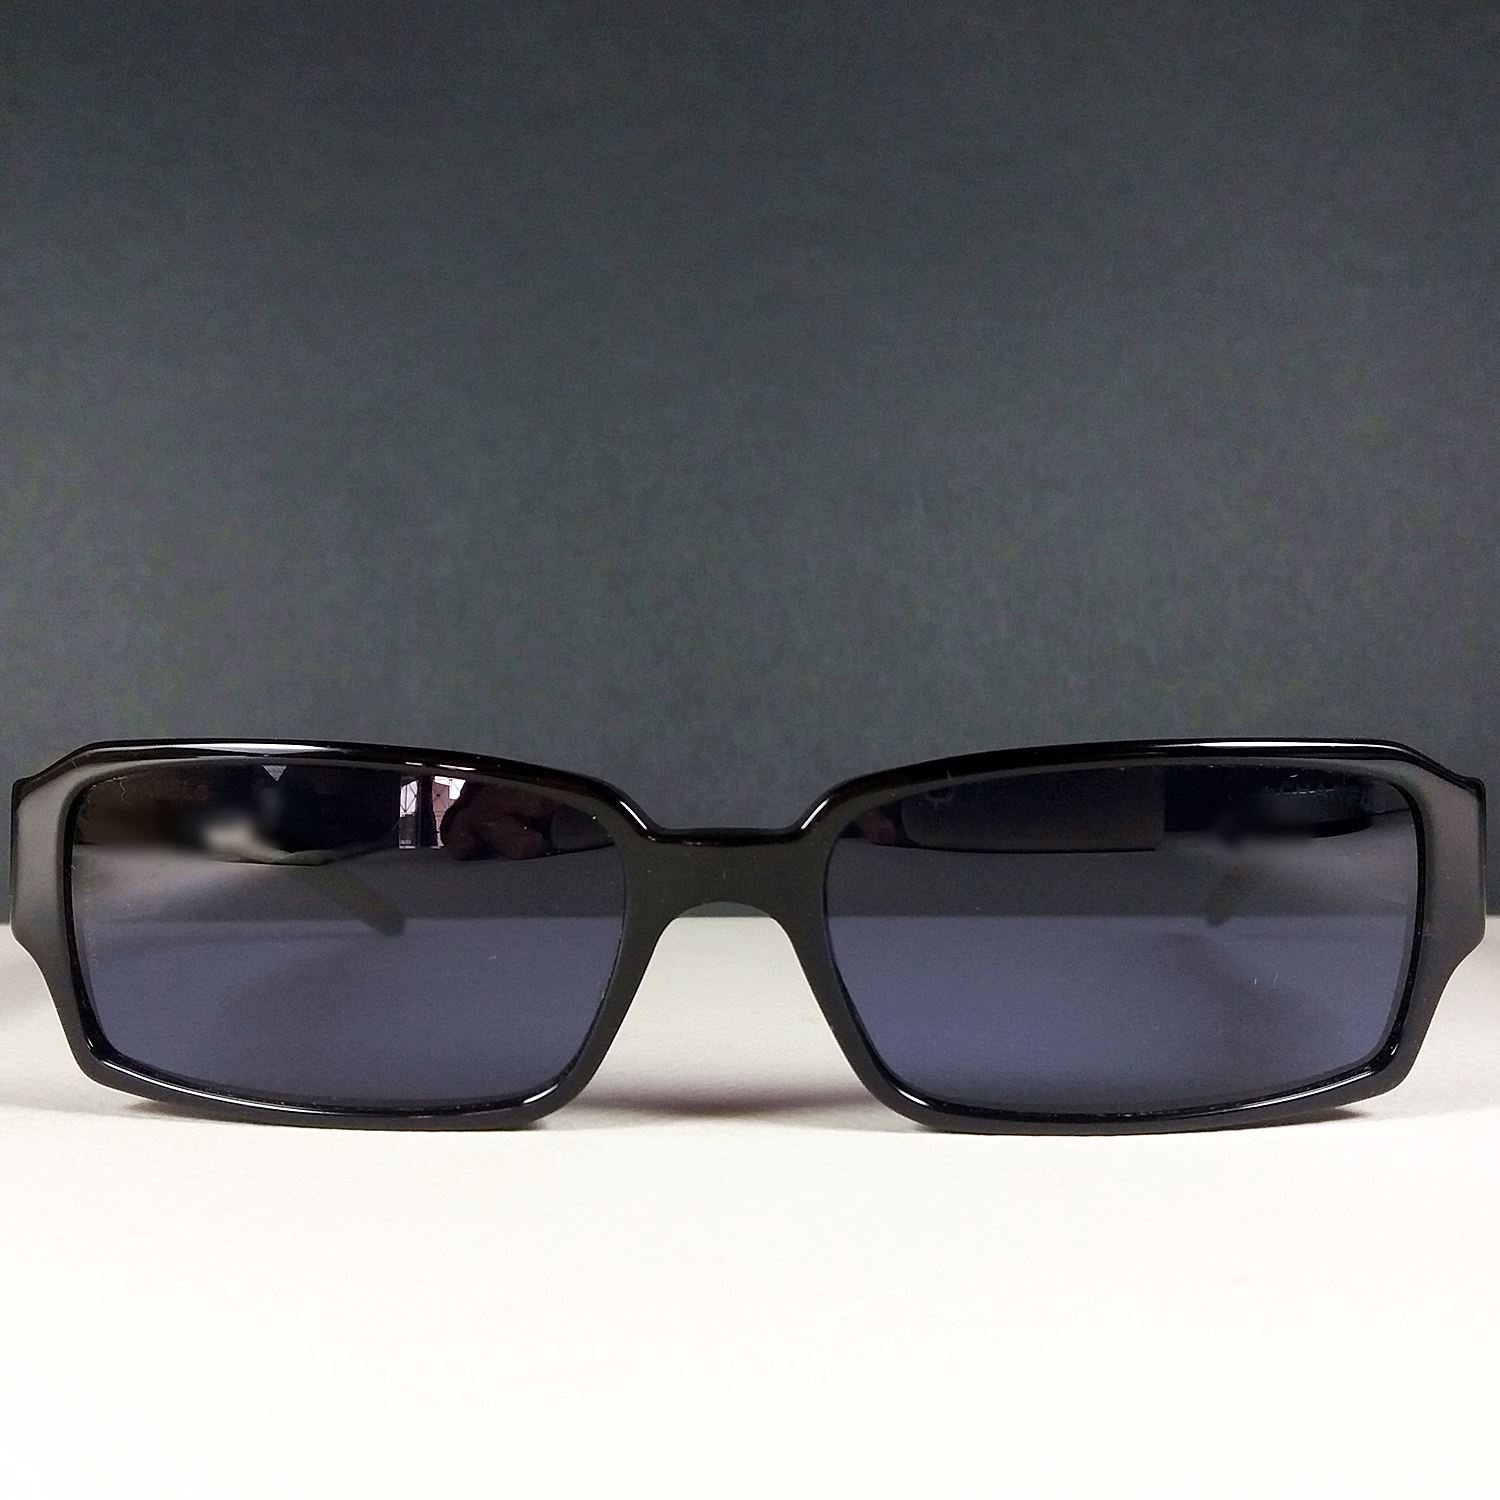 Chanel 5009 c.501/91 Sunglasses Frame Only